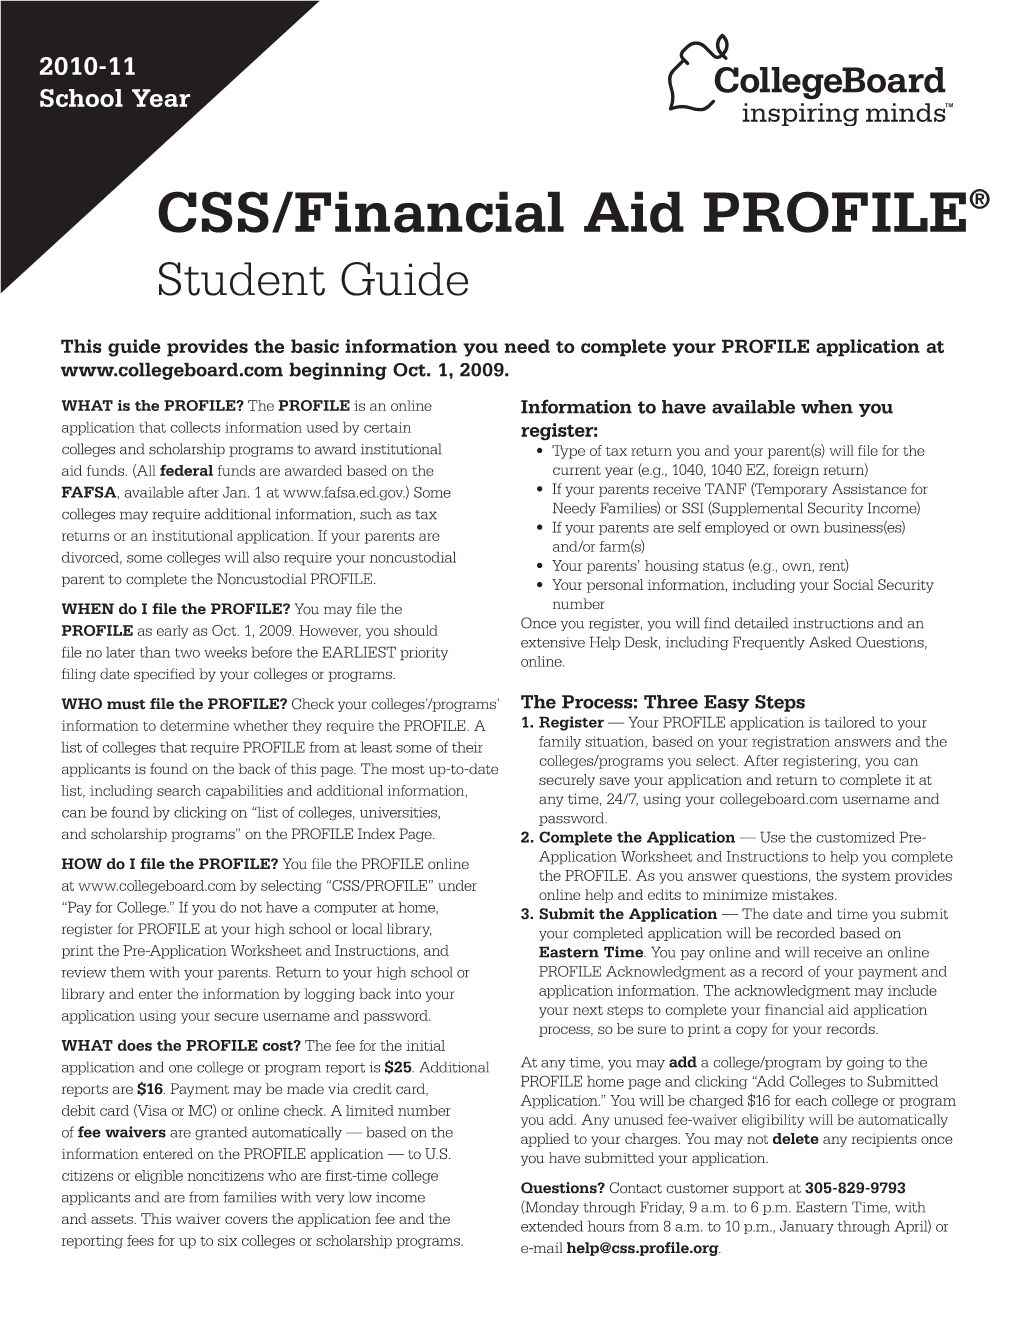 CSS/Financial Aid PROFILE Student Guide